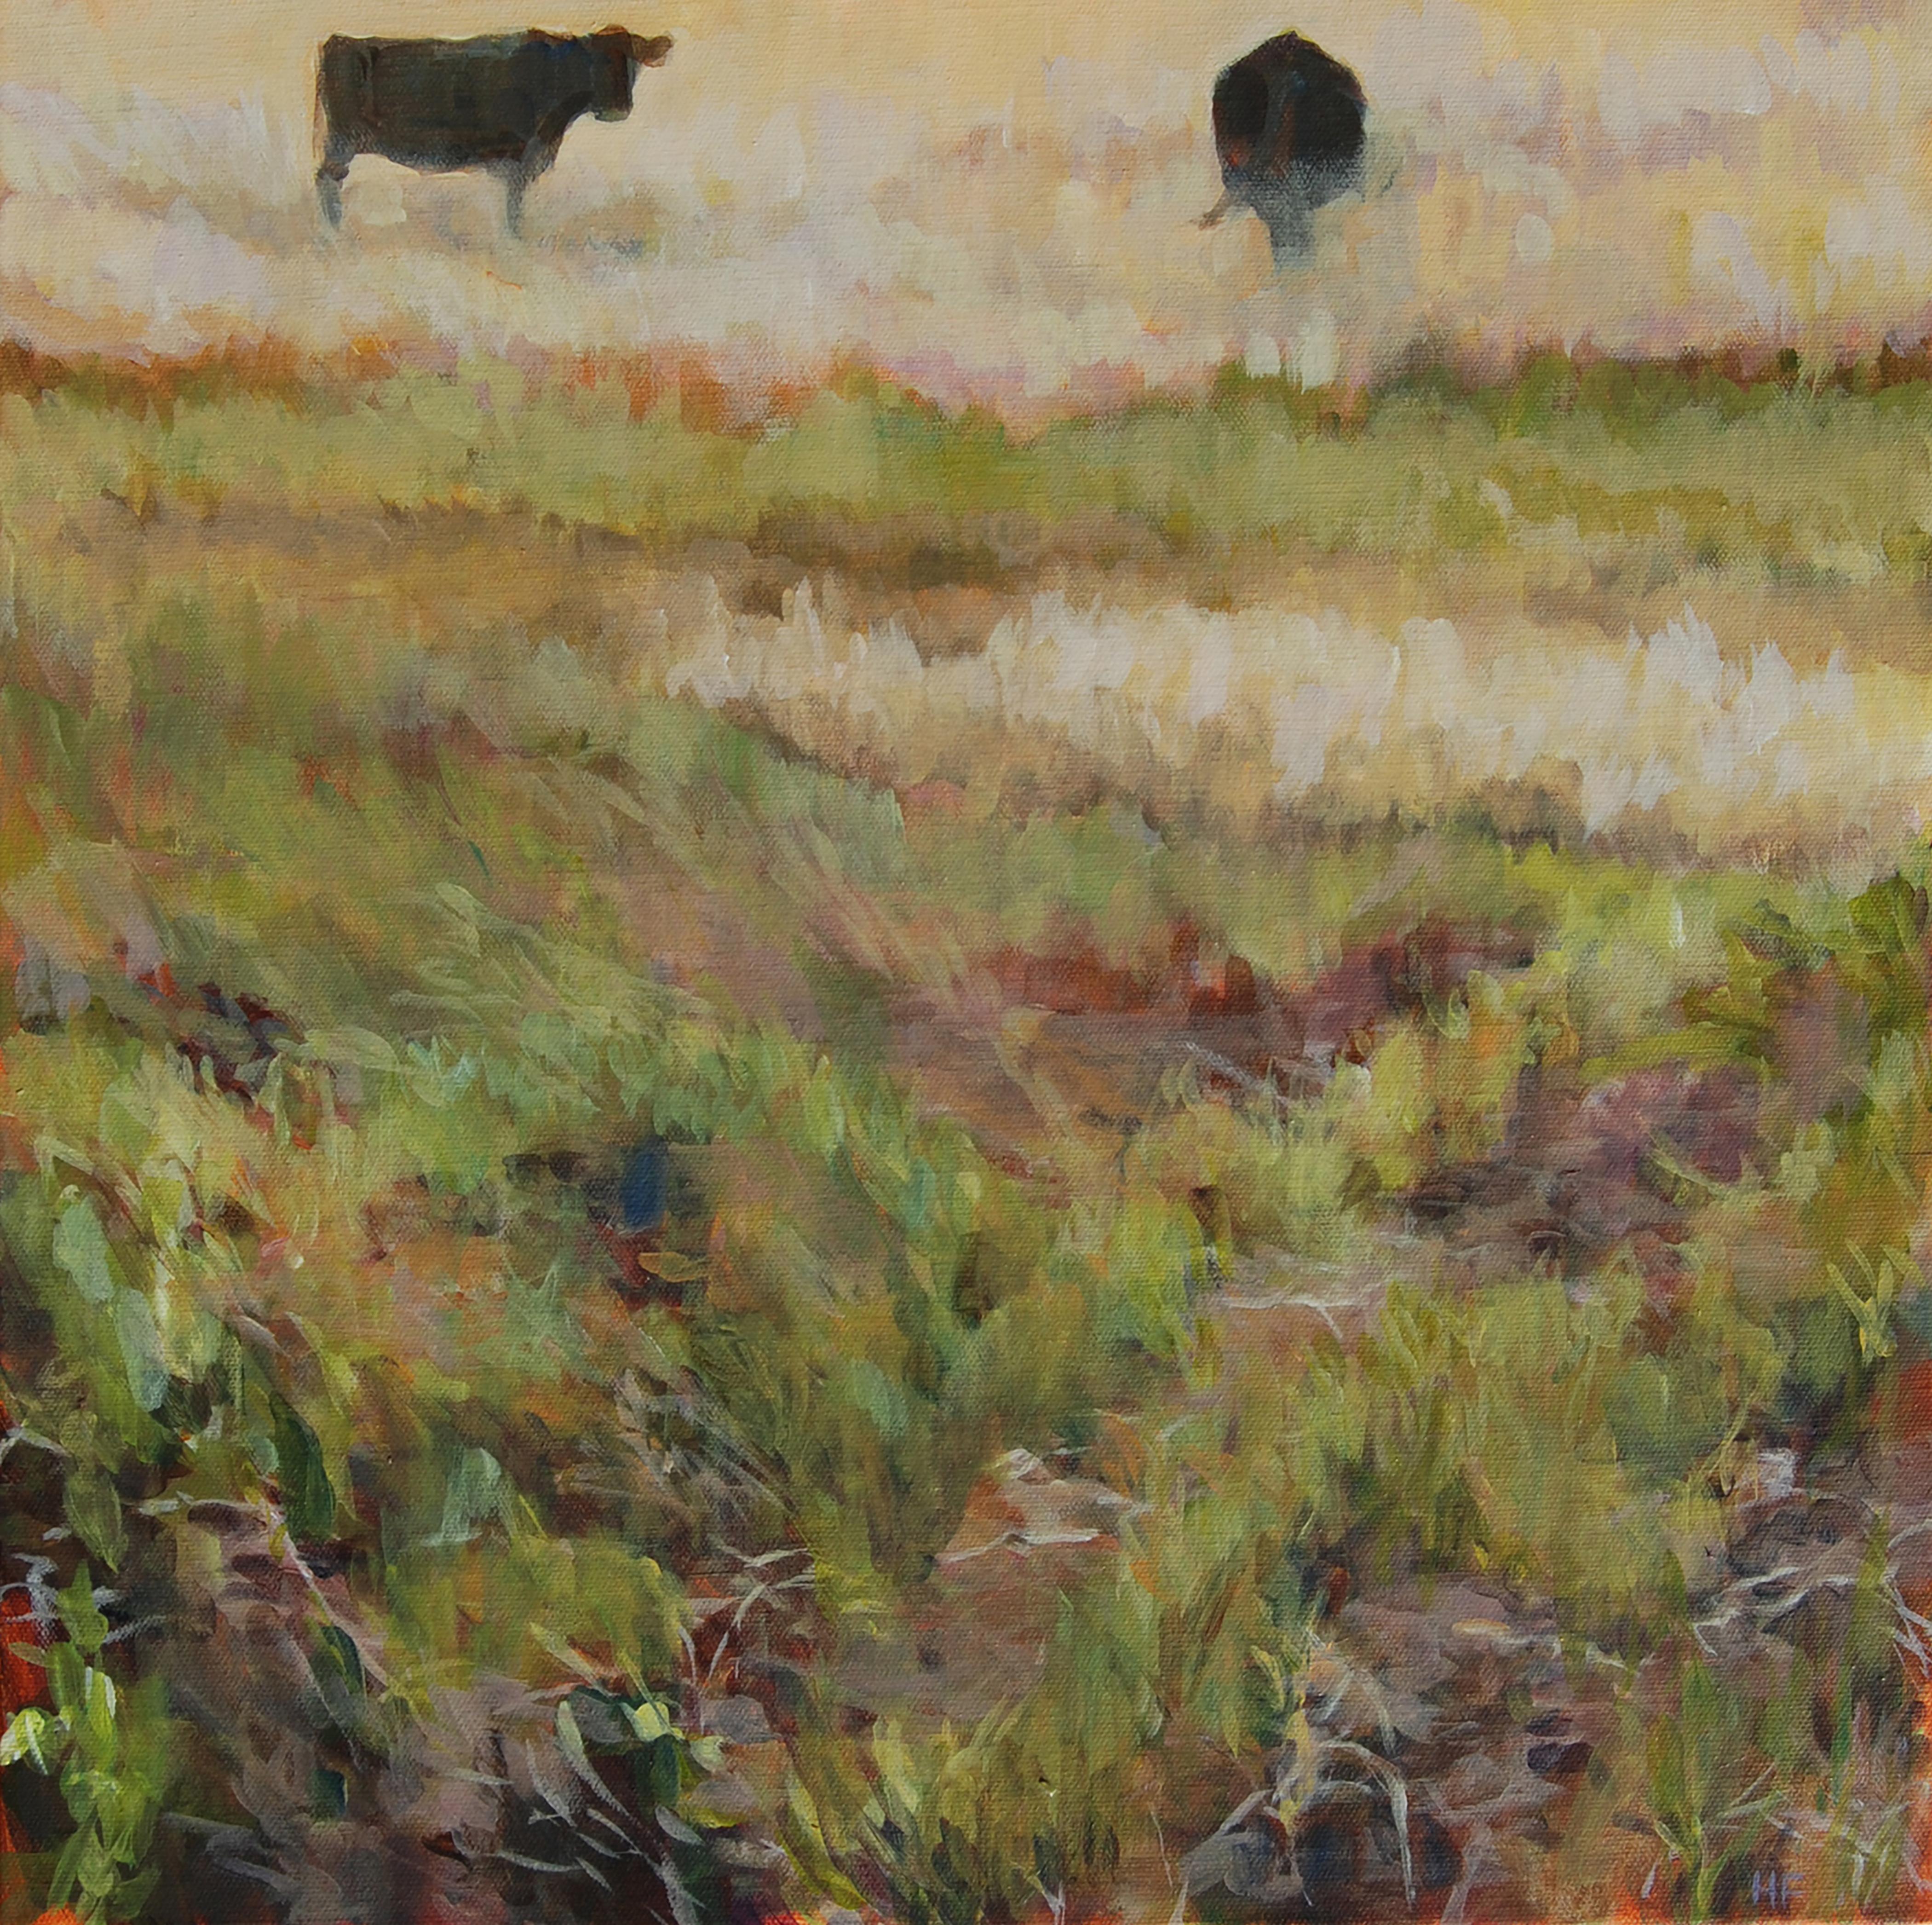 Heather Foster Animal Painting - Abiquiu Texture (Contemporary western landscape of cows & vivid lush grasses)